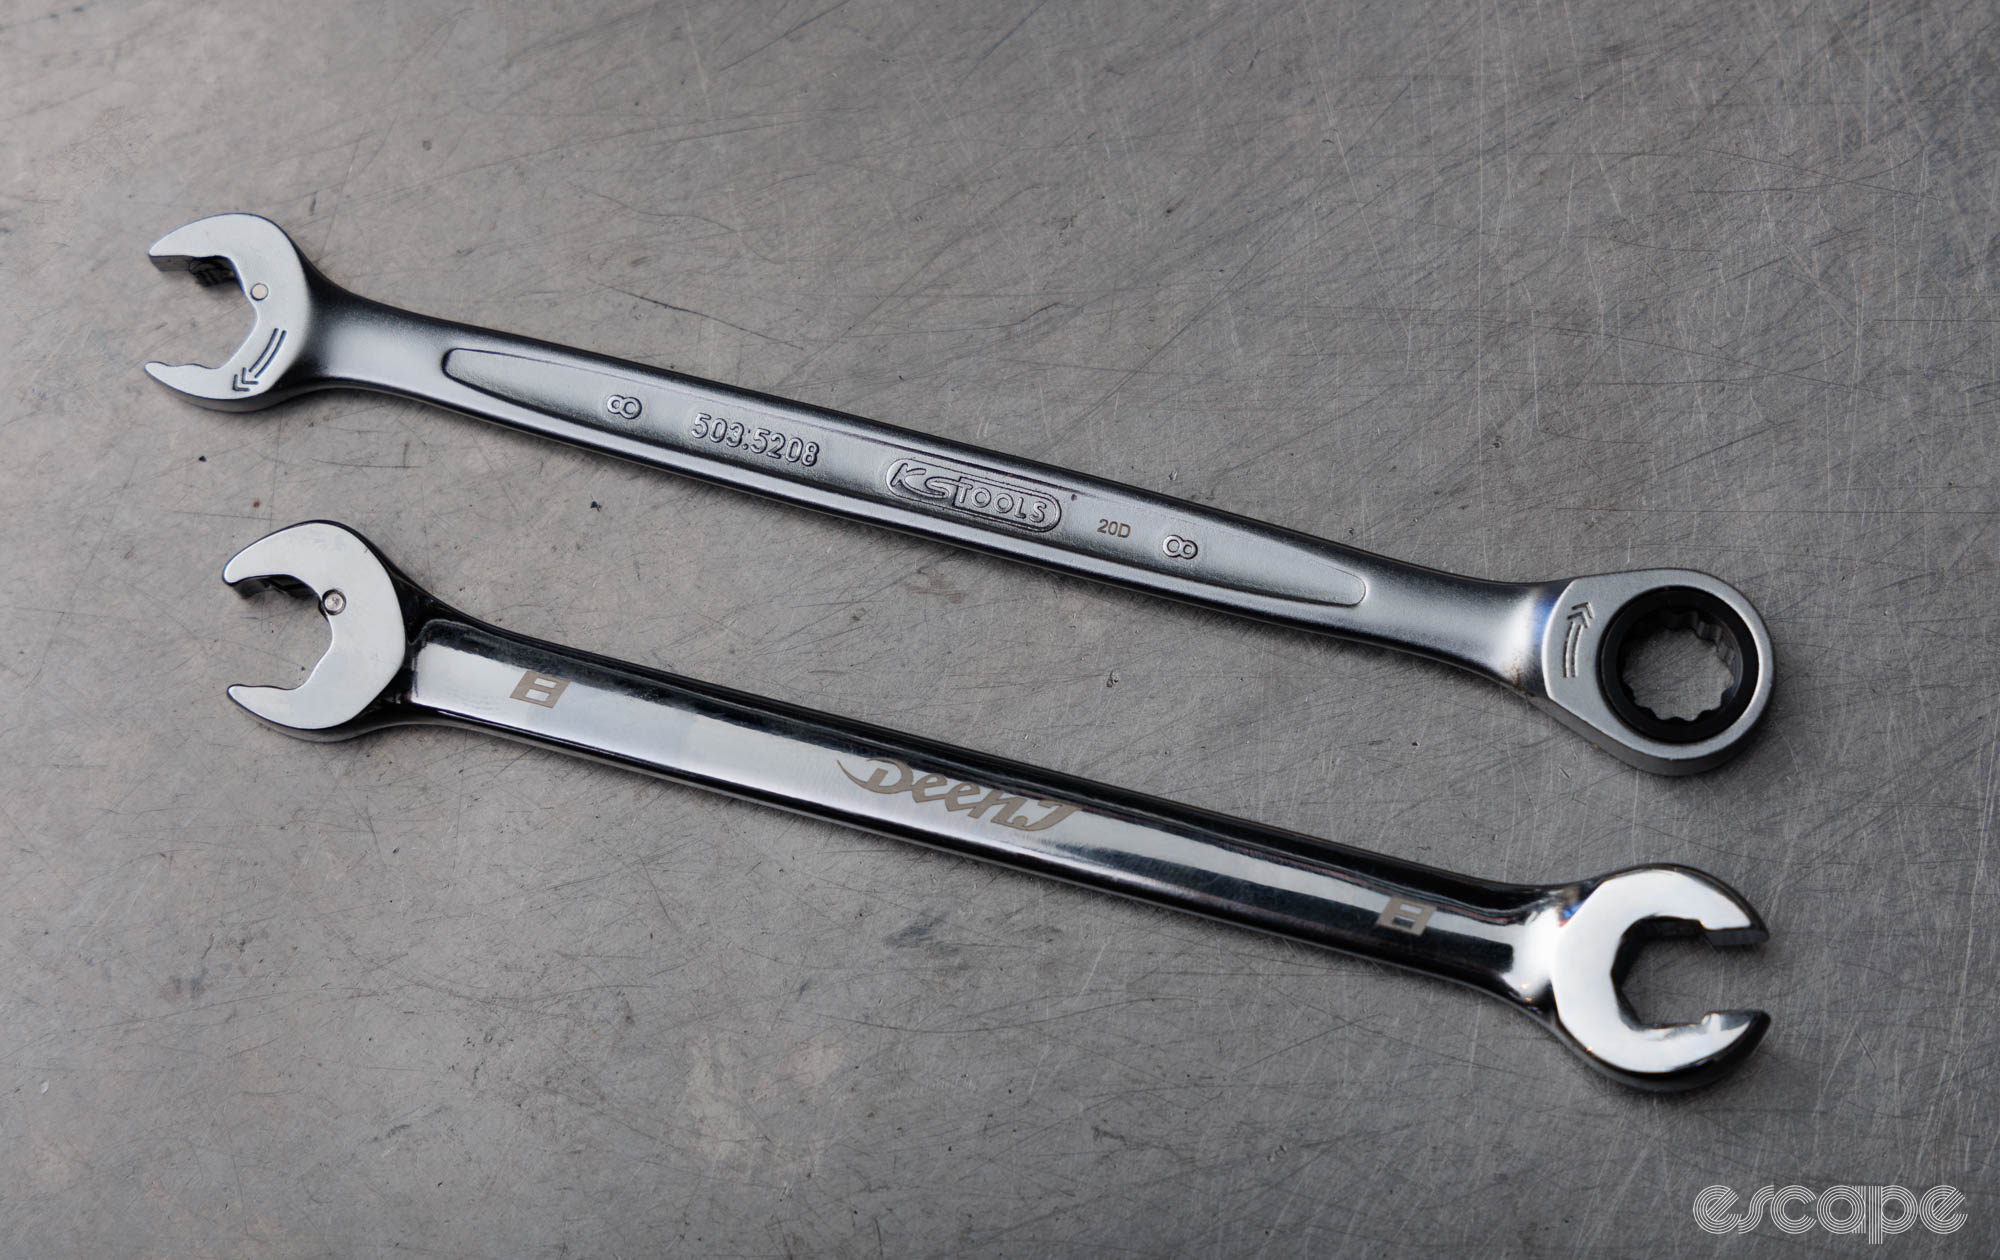 KS Tool and Deen J Wrench sit alongside each other, both offering a similar ratchet function.